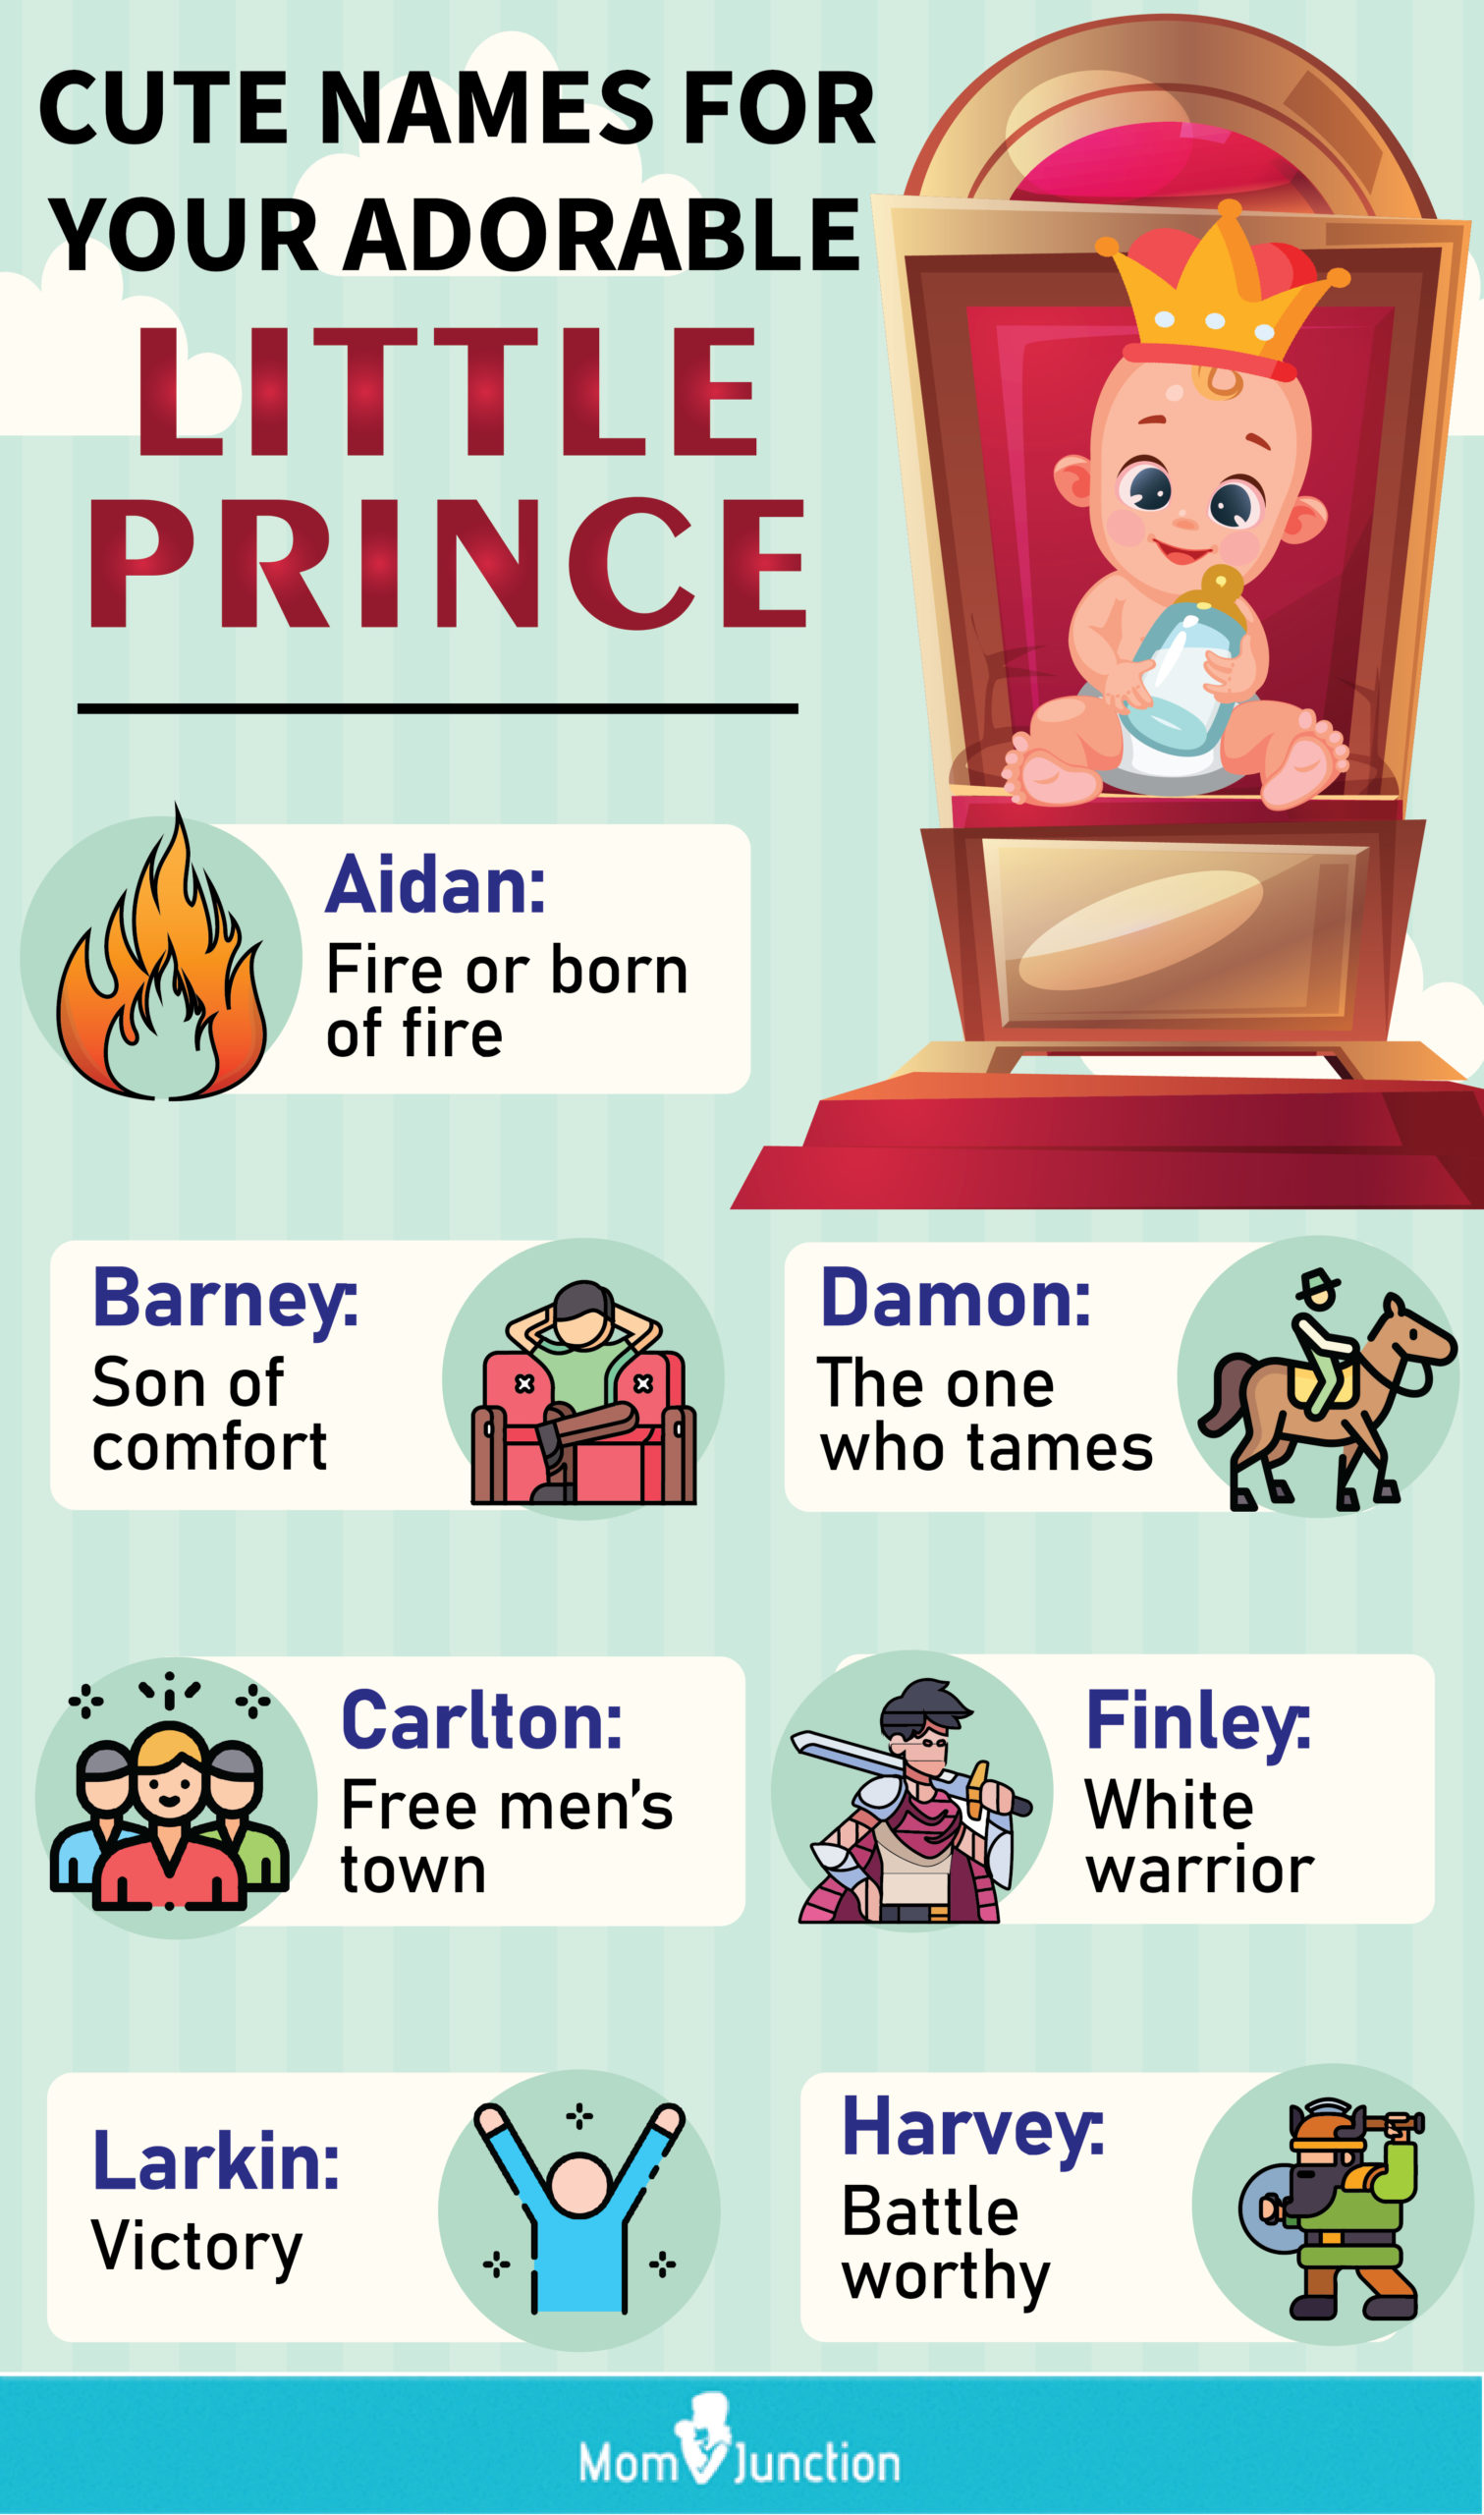 names dor your adorable little prince [infographic]